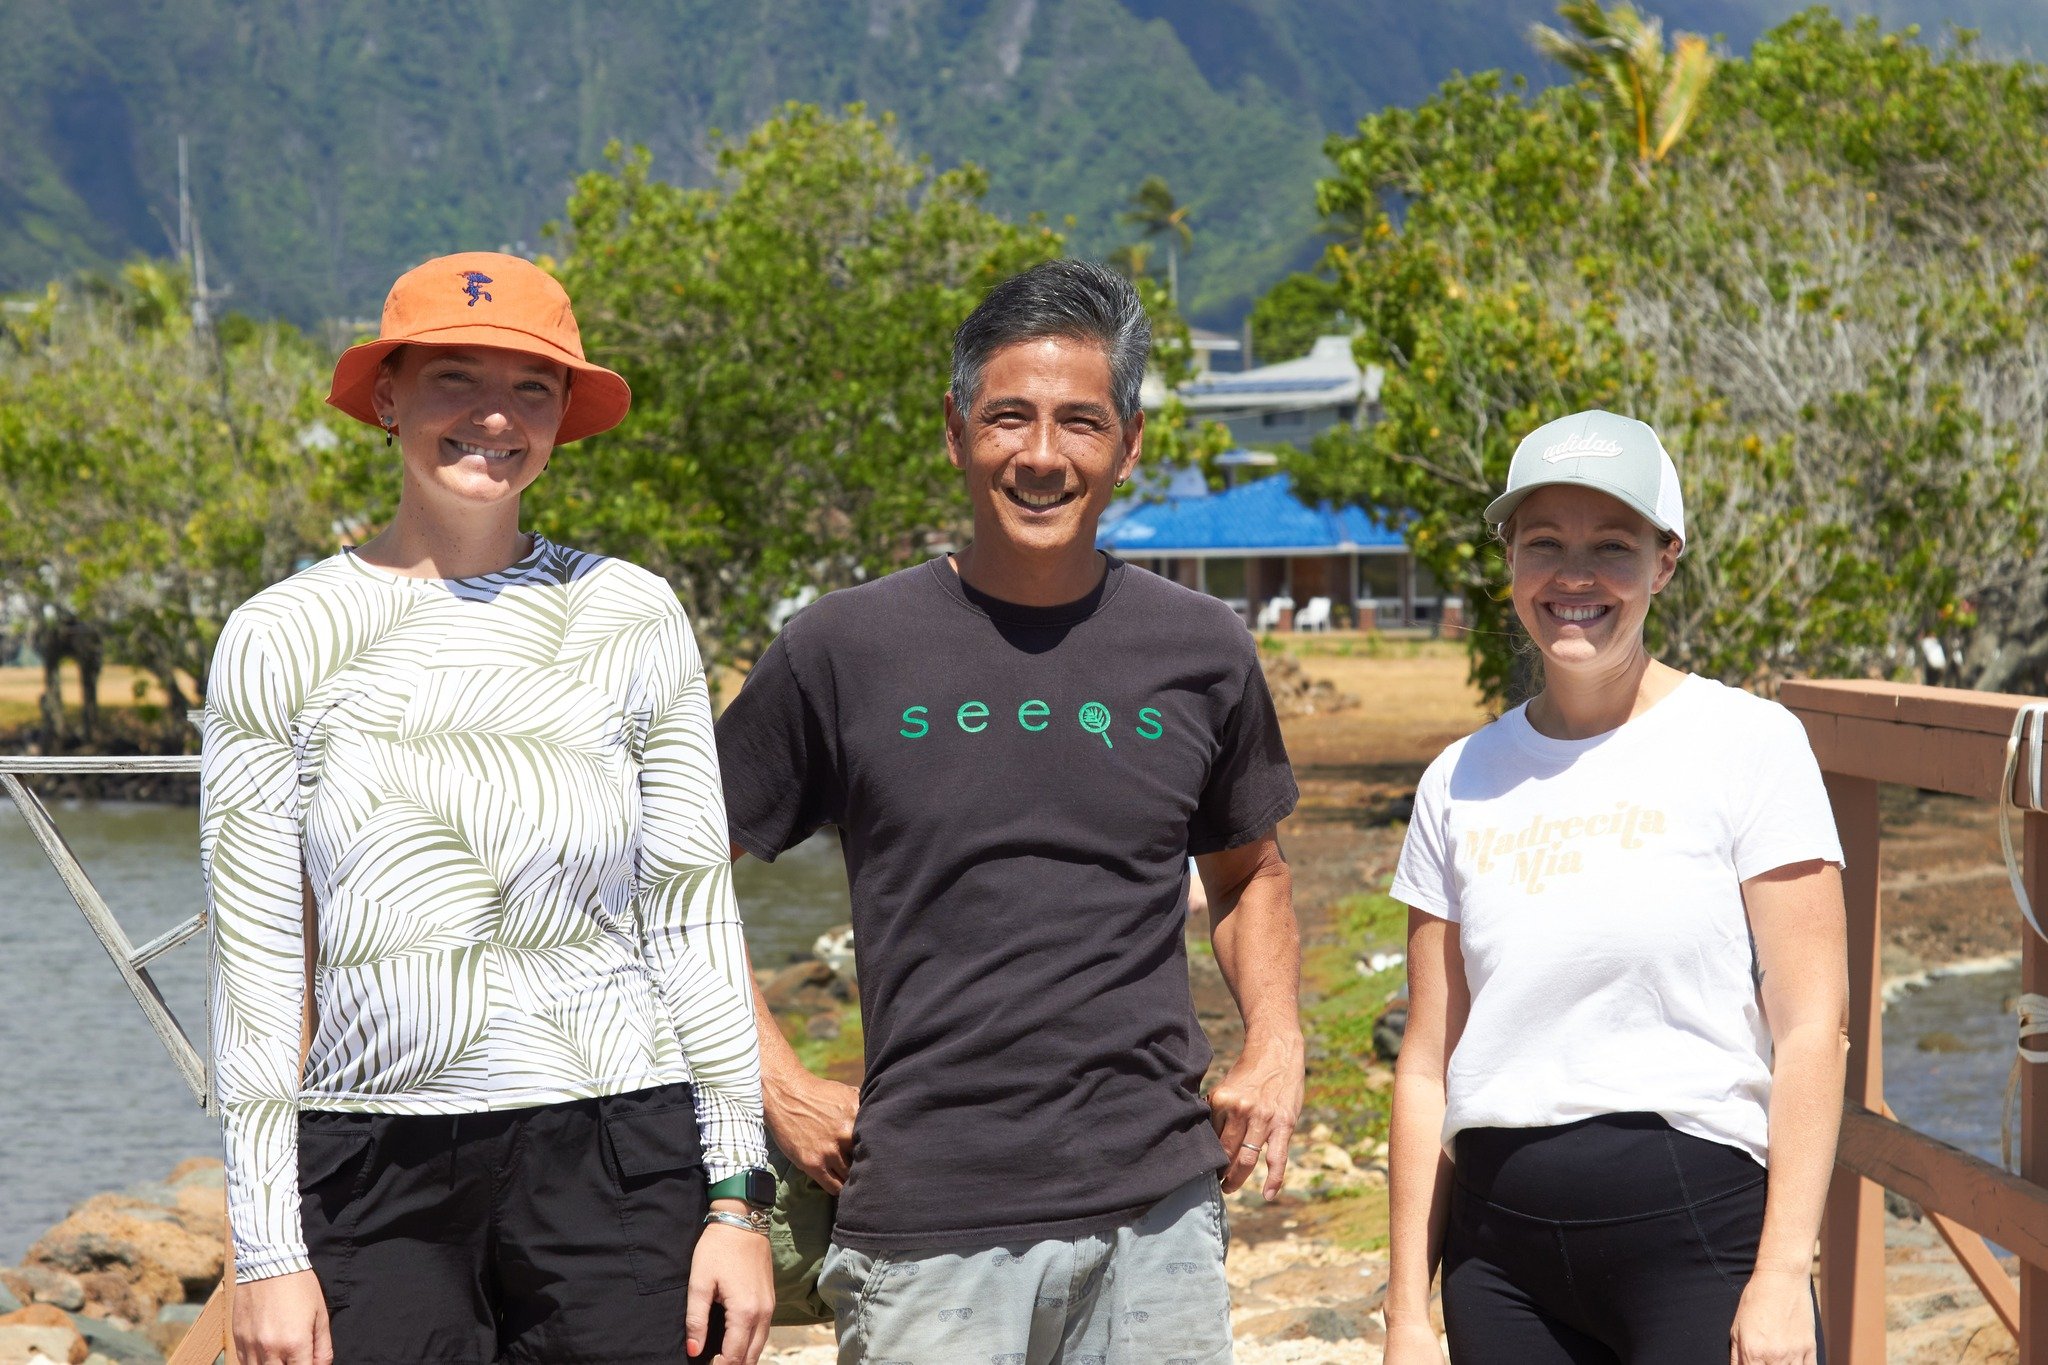 SEEQS Teachers go above and beyond to plan community projects, partnerships with organizations across Oʻahu, and interdisciplinary learning experiences that foster a deep sense of connection and responsibility for taking care of our island home 💚🙌 